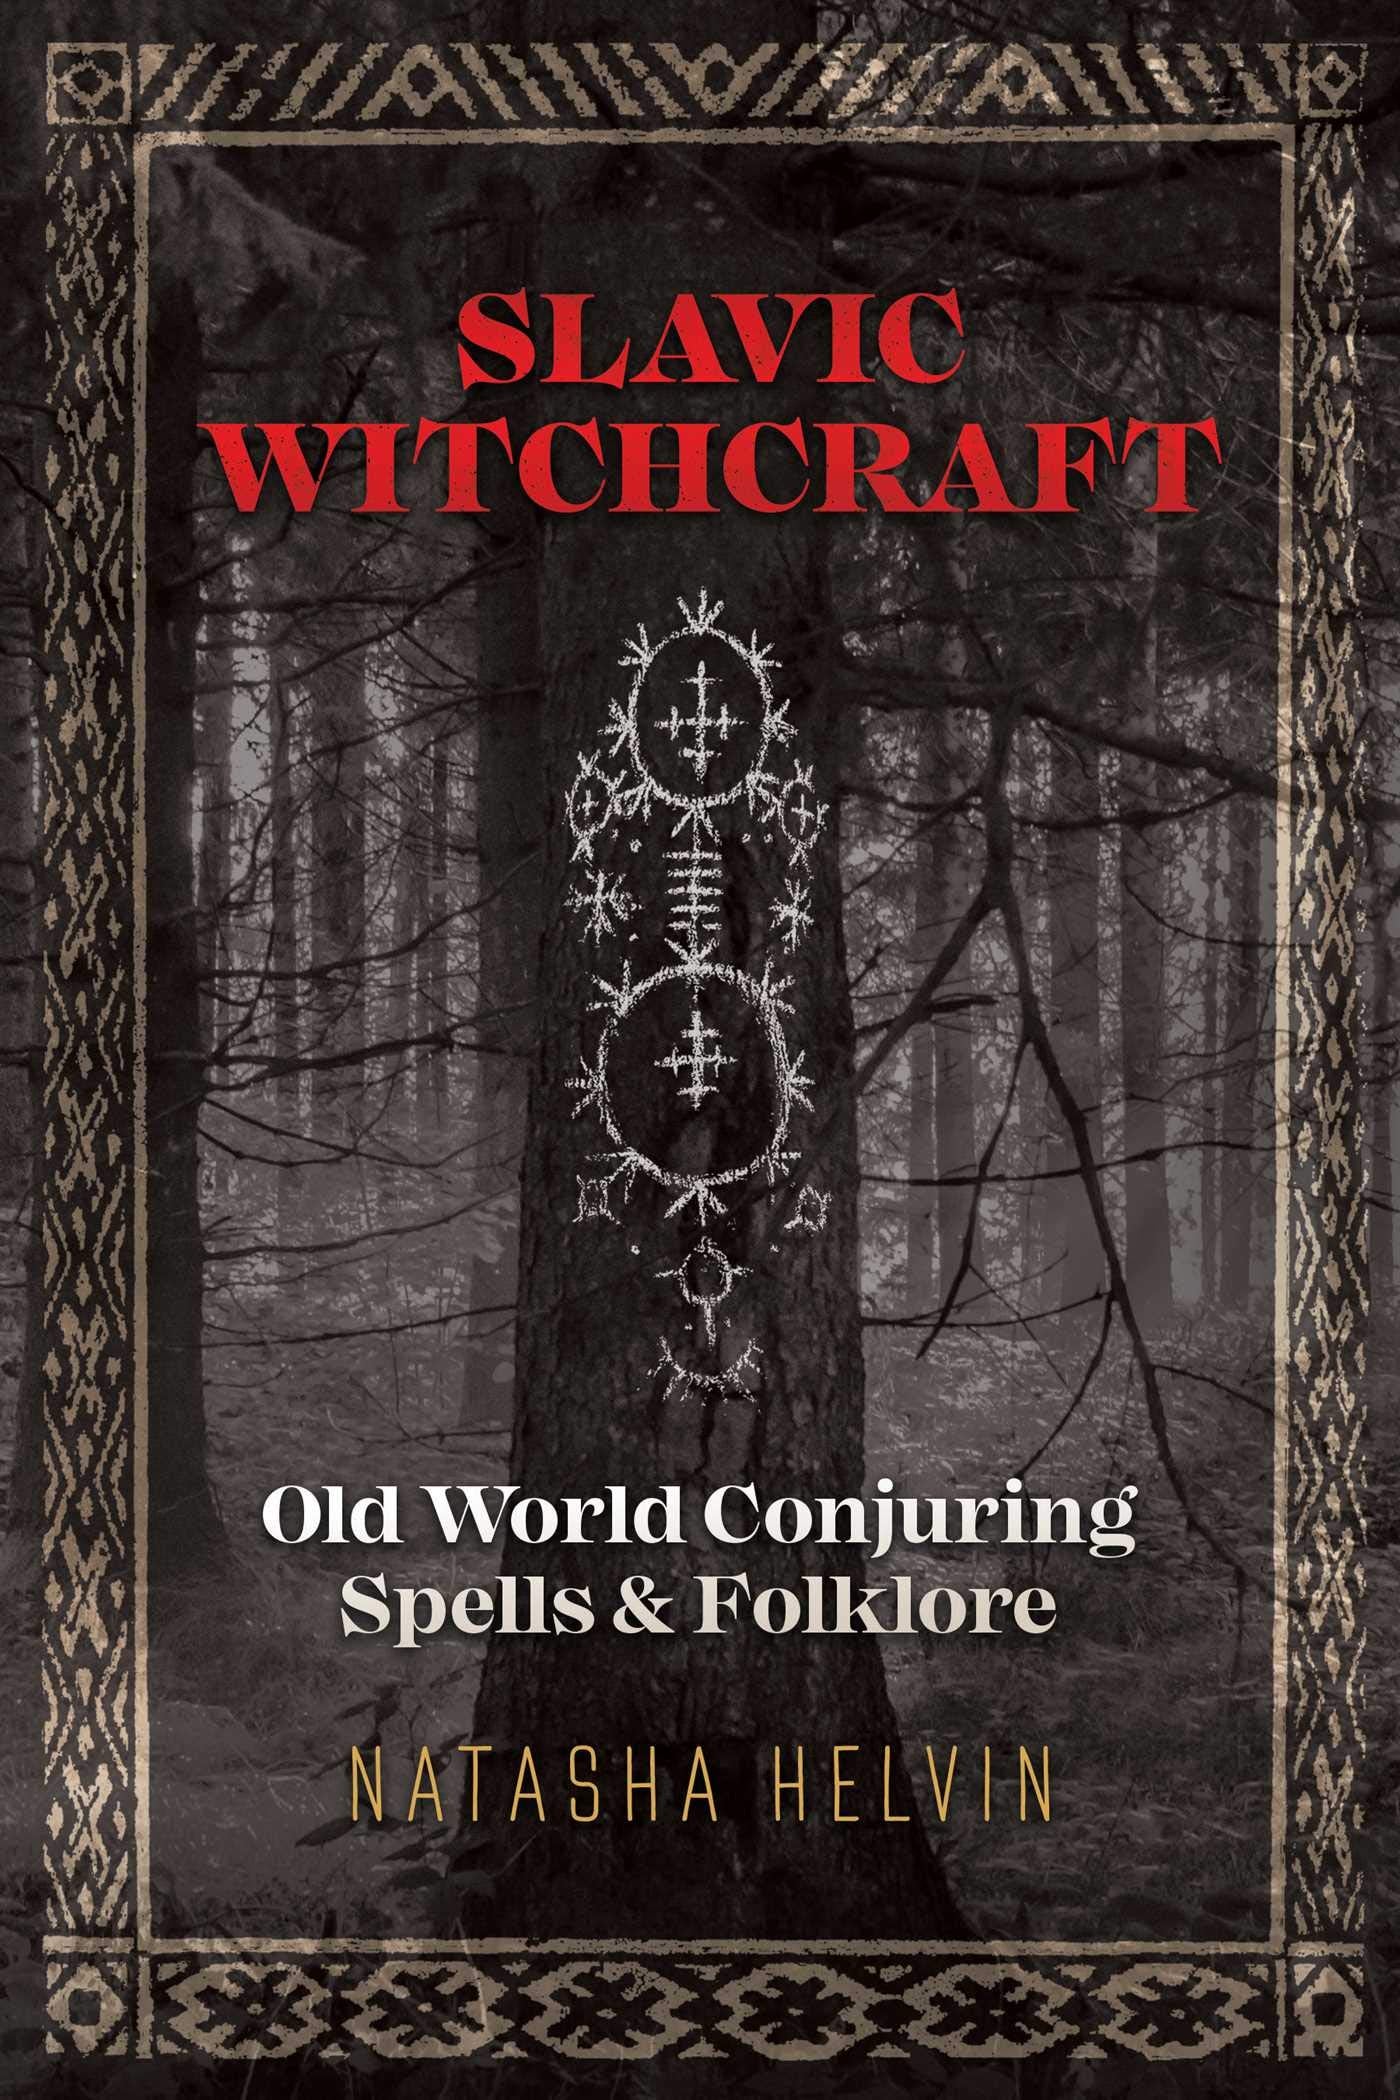 Slavic Whitchcraft: Old Word Conjuring Spells & Folklore